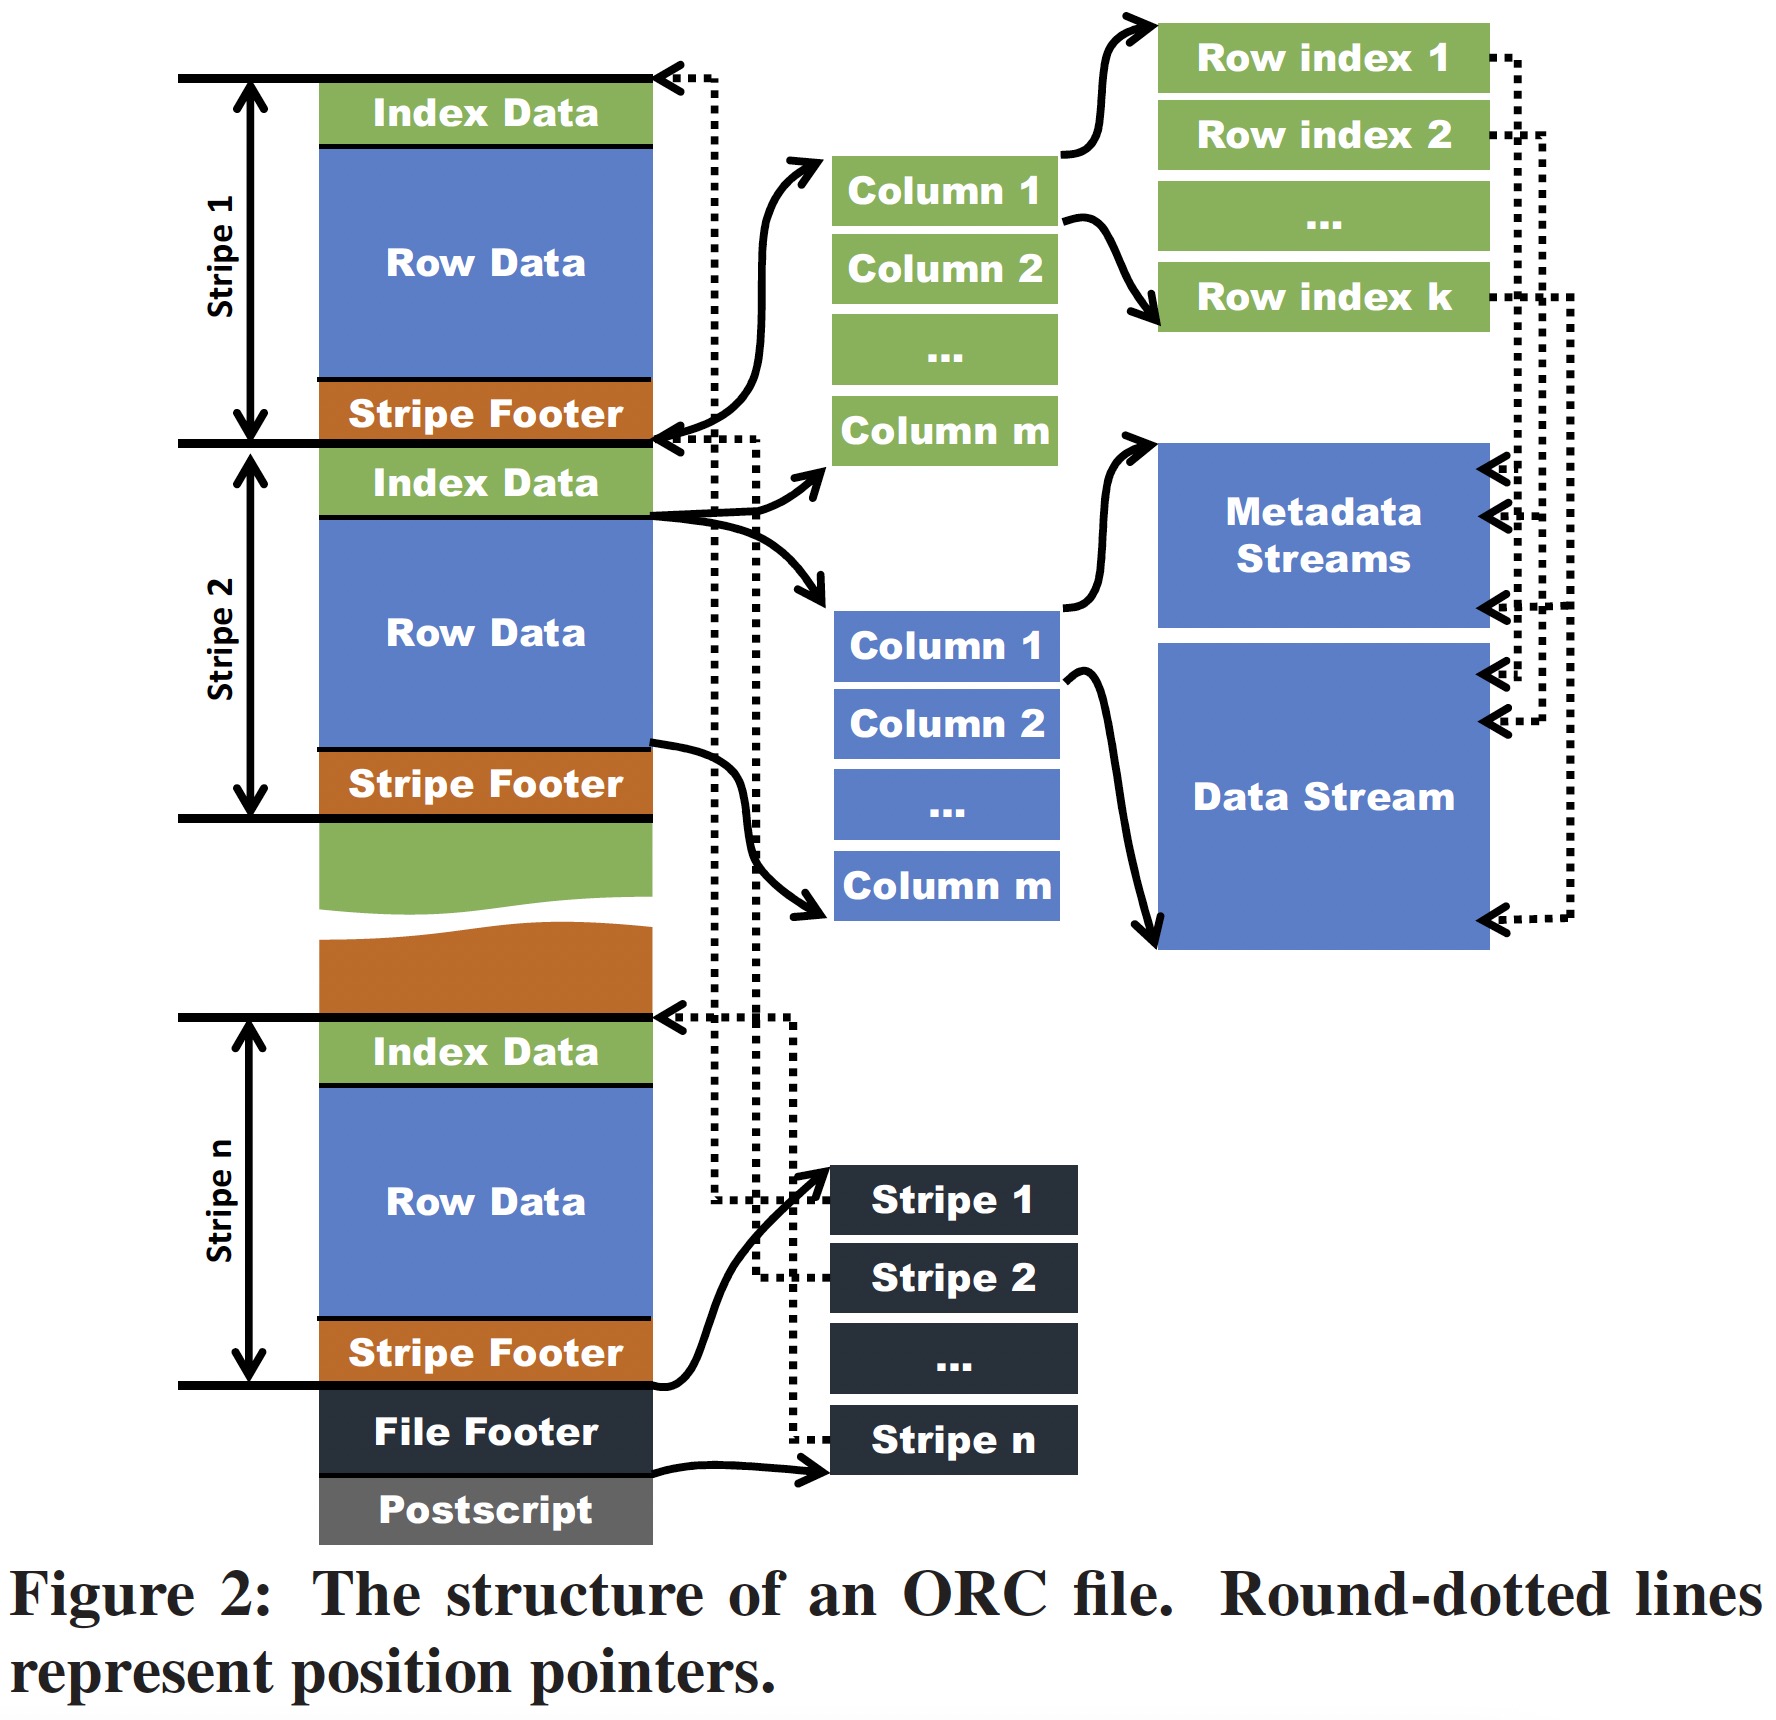 The structure of an ORC file